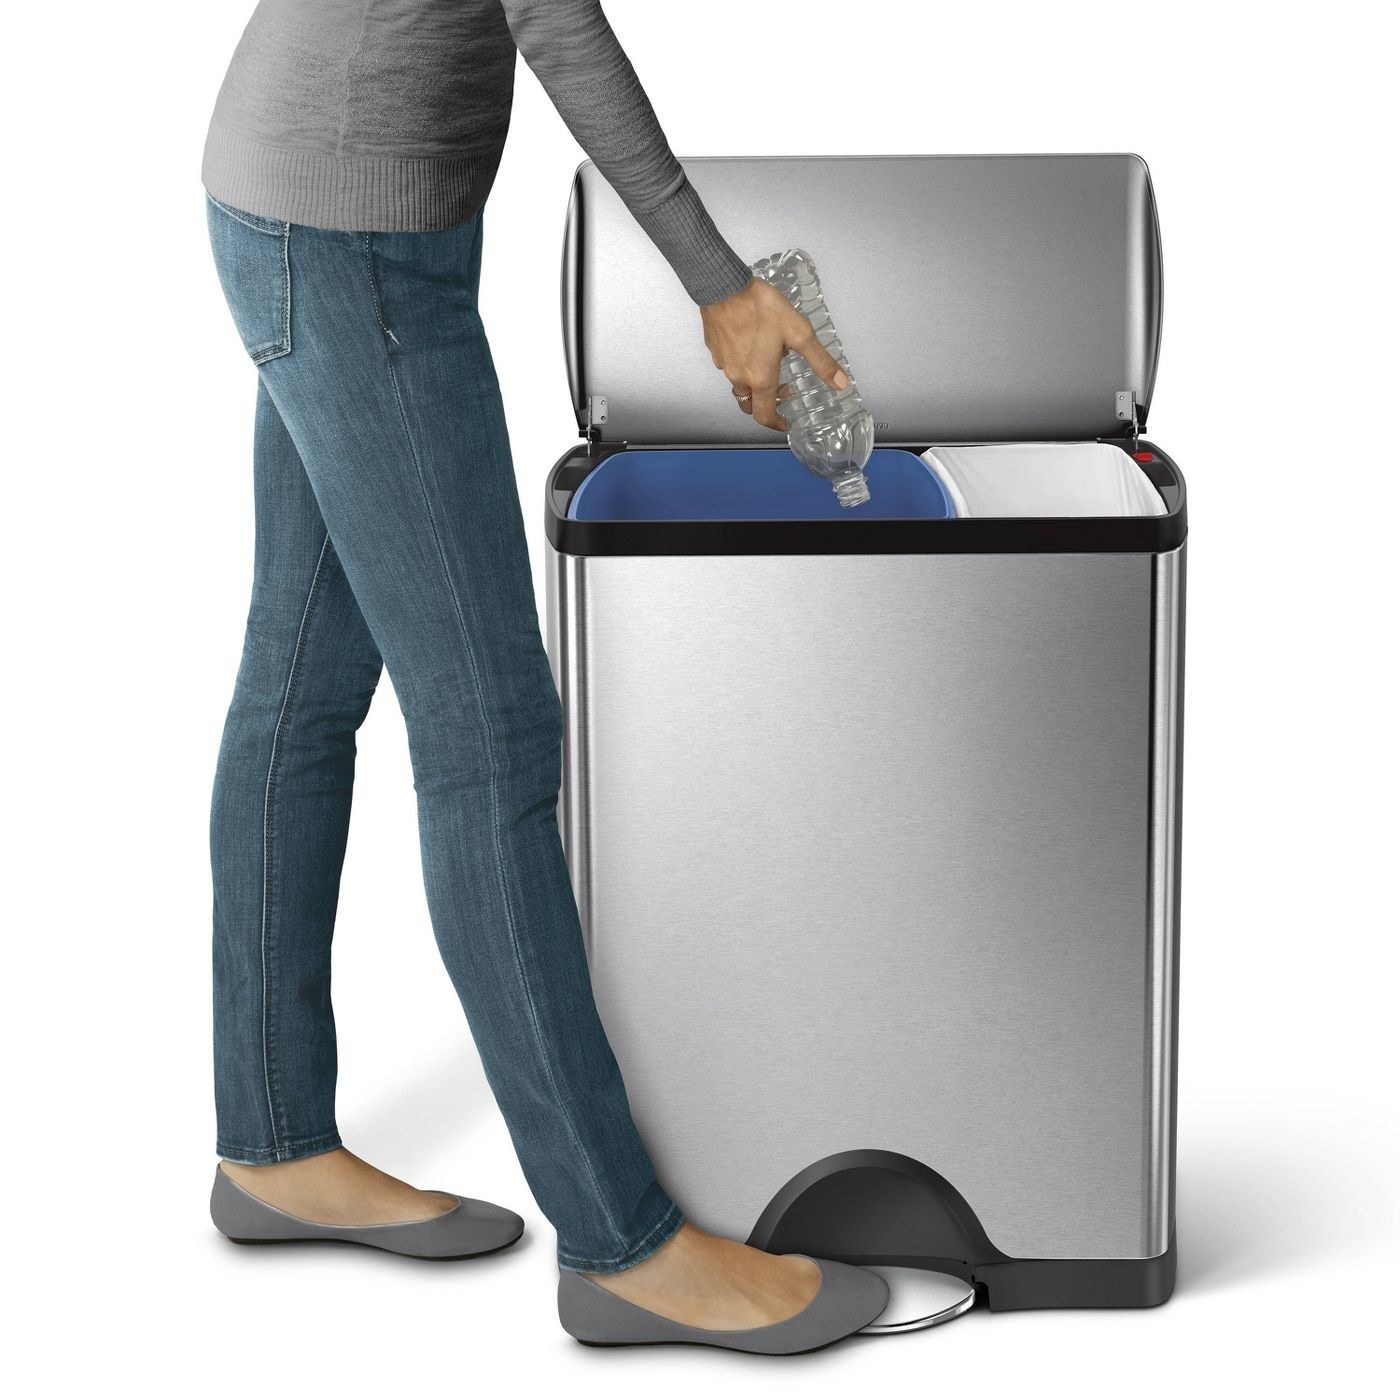 woman stepping on the step of a stainless steel trashcan with two compartments inside